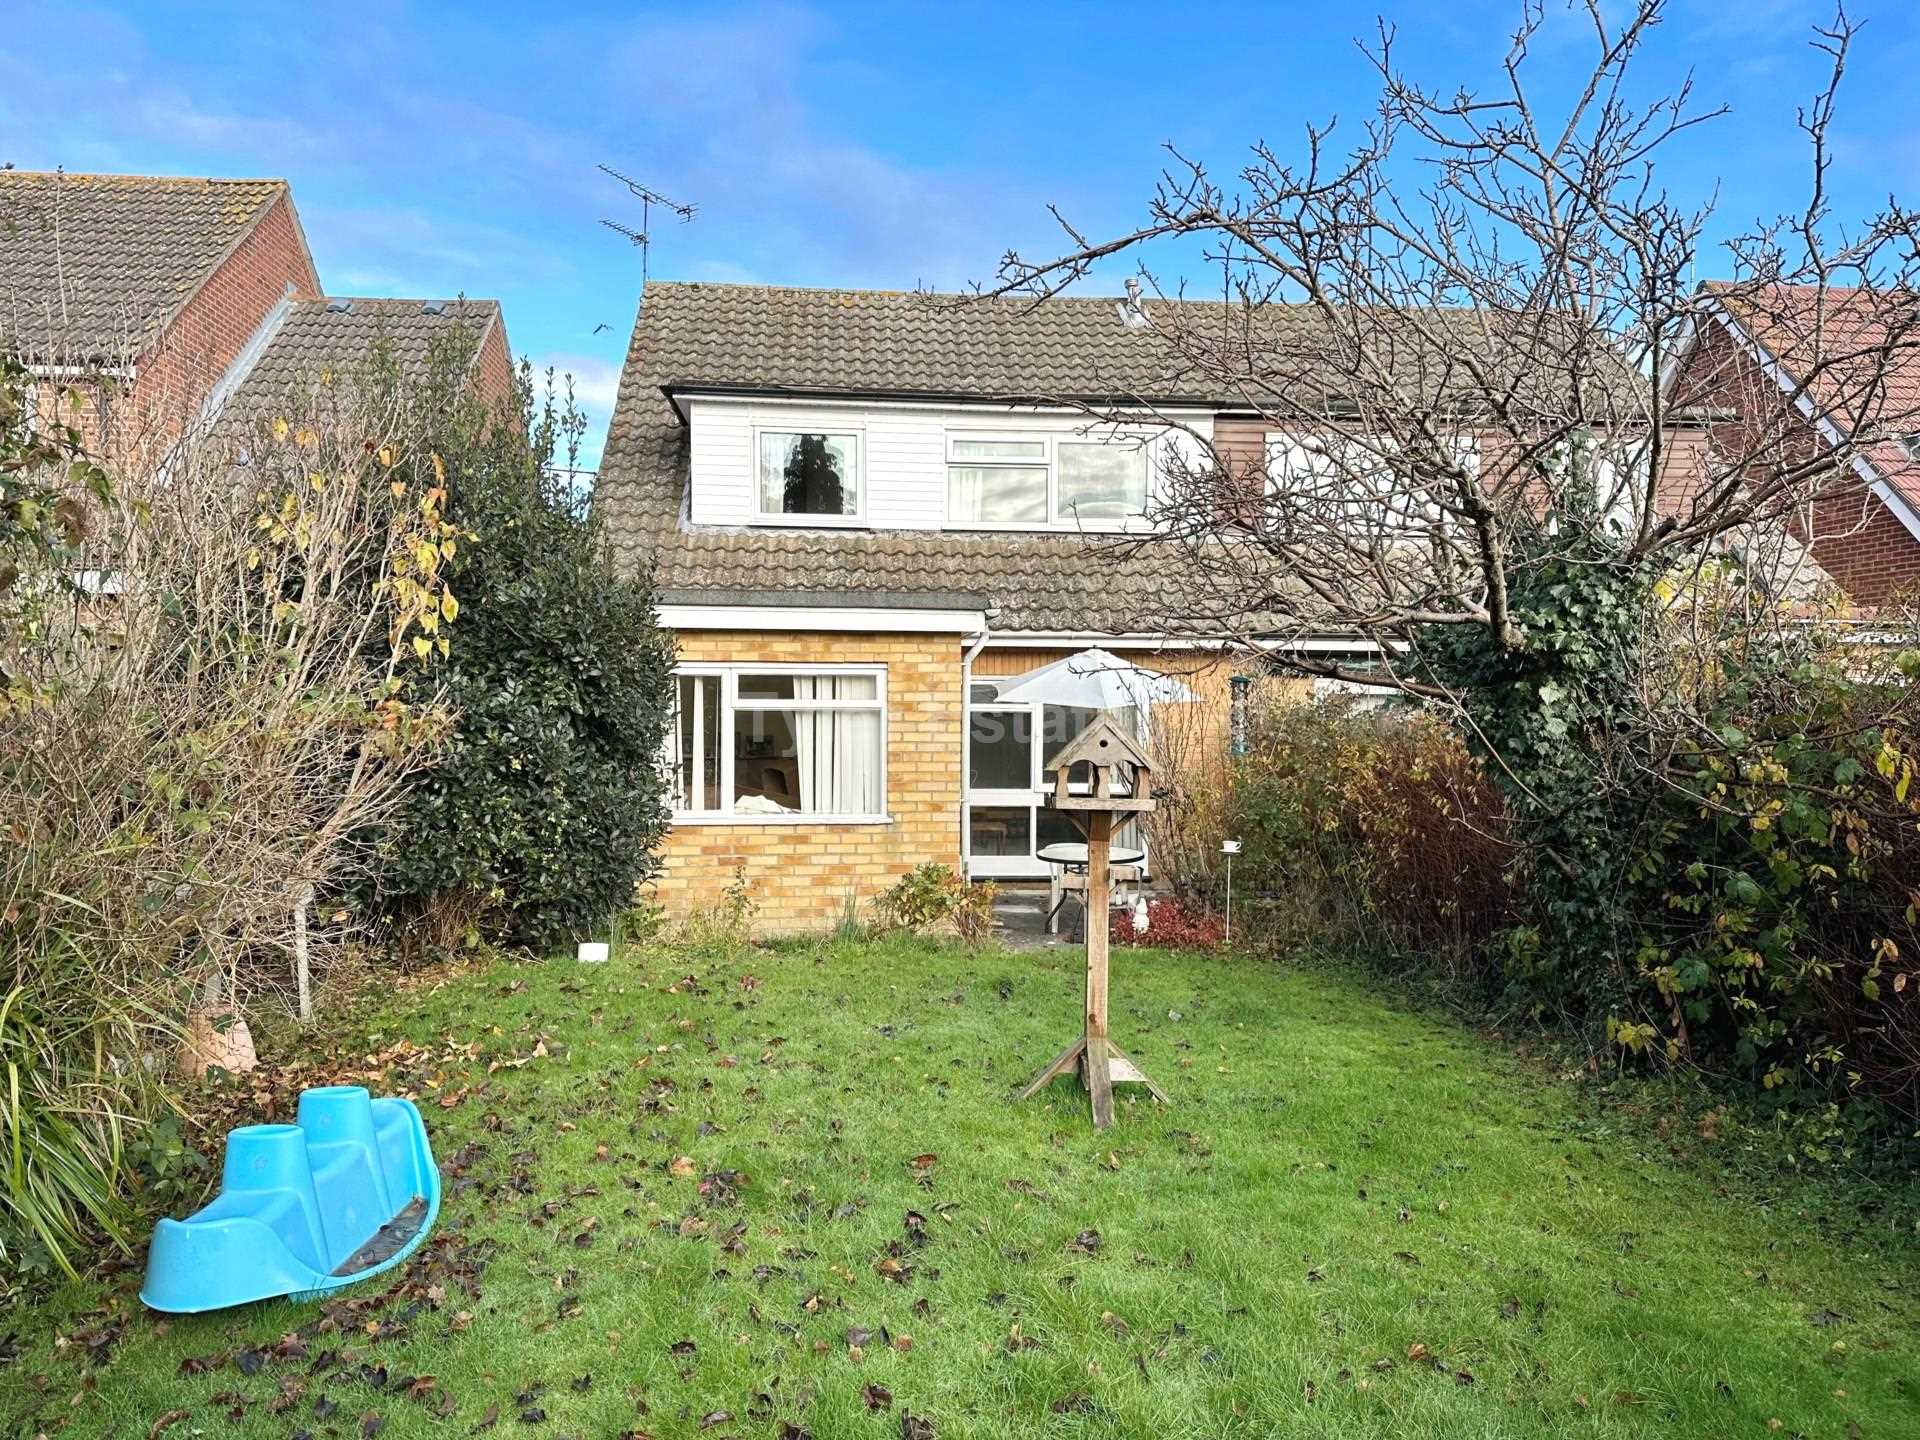 Norsey View Drive, Billericay, Image 12